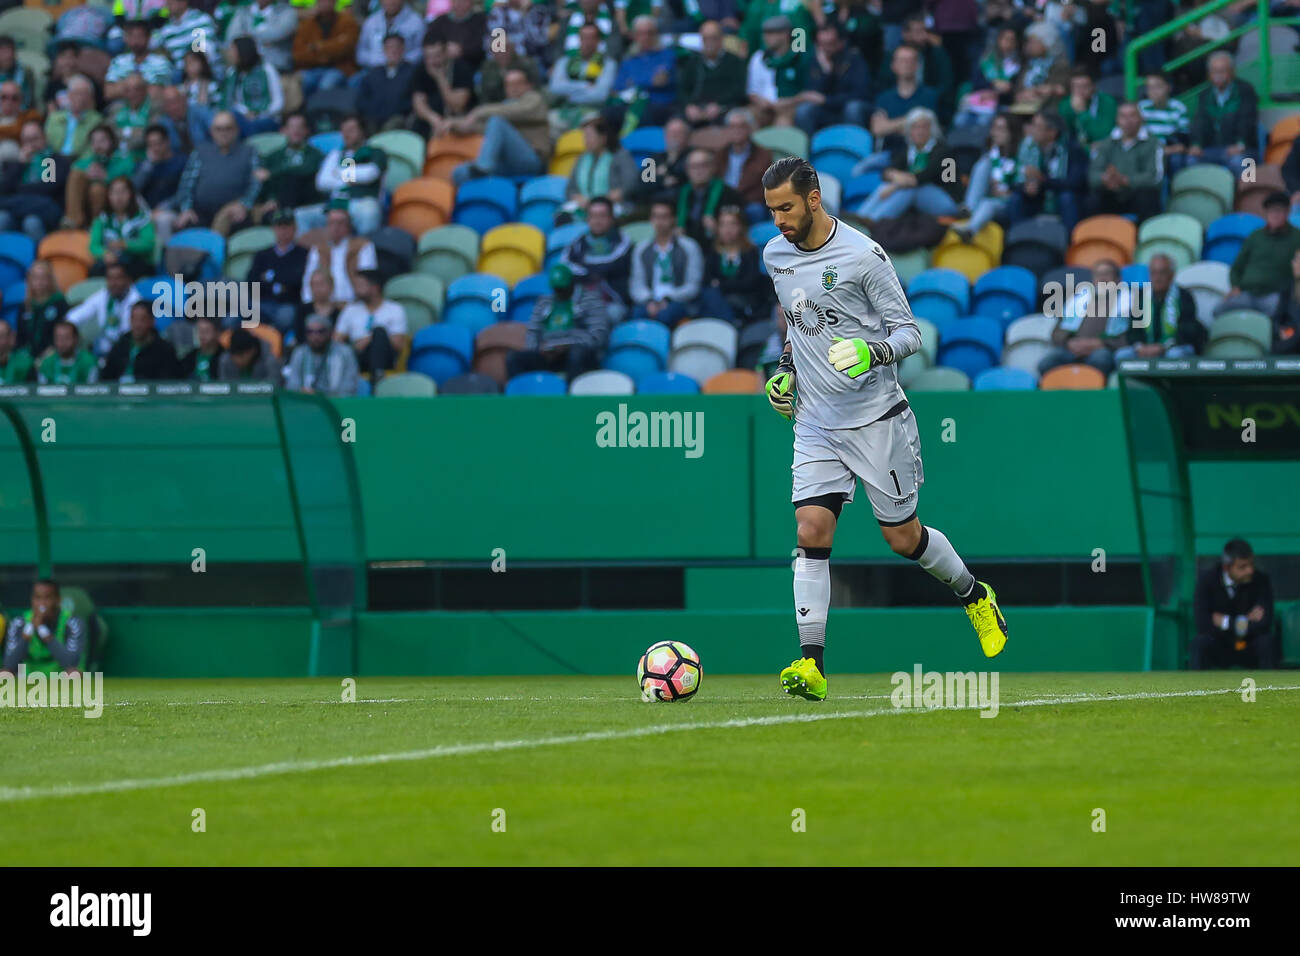 Lisbon, Portugal. 18th March, 2017.  SportingÕs goalkeeper from Portugal Rui Patricio (1) in action during the game Sporting CP v CD Nacional © Alexandre de Sousa/Alamy Live News Stock Photo